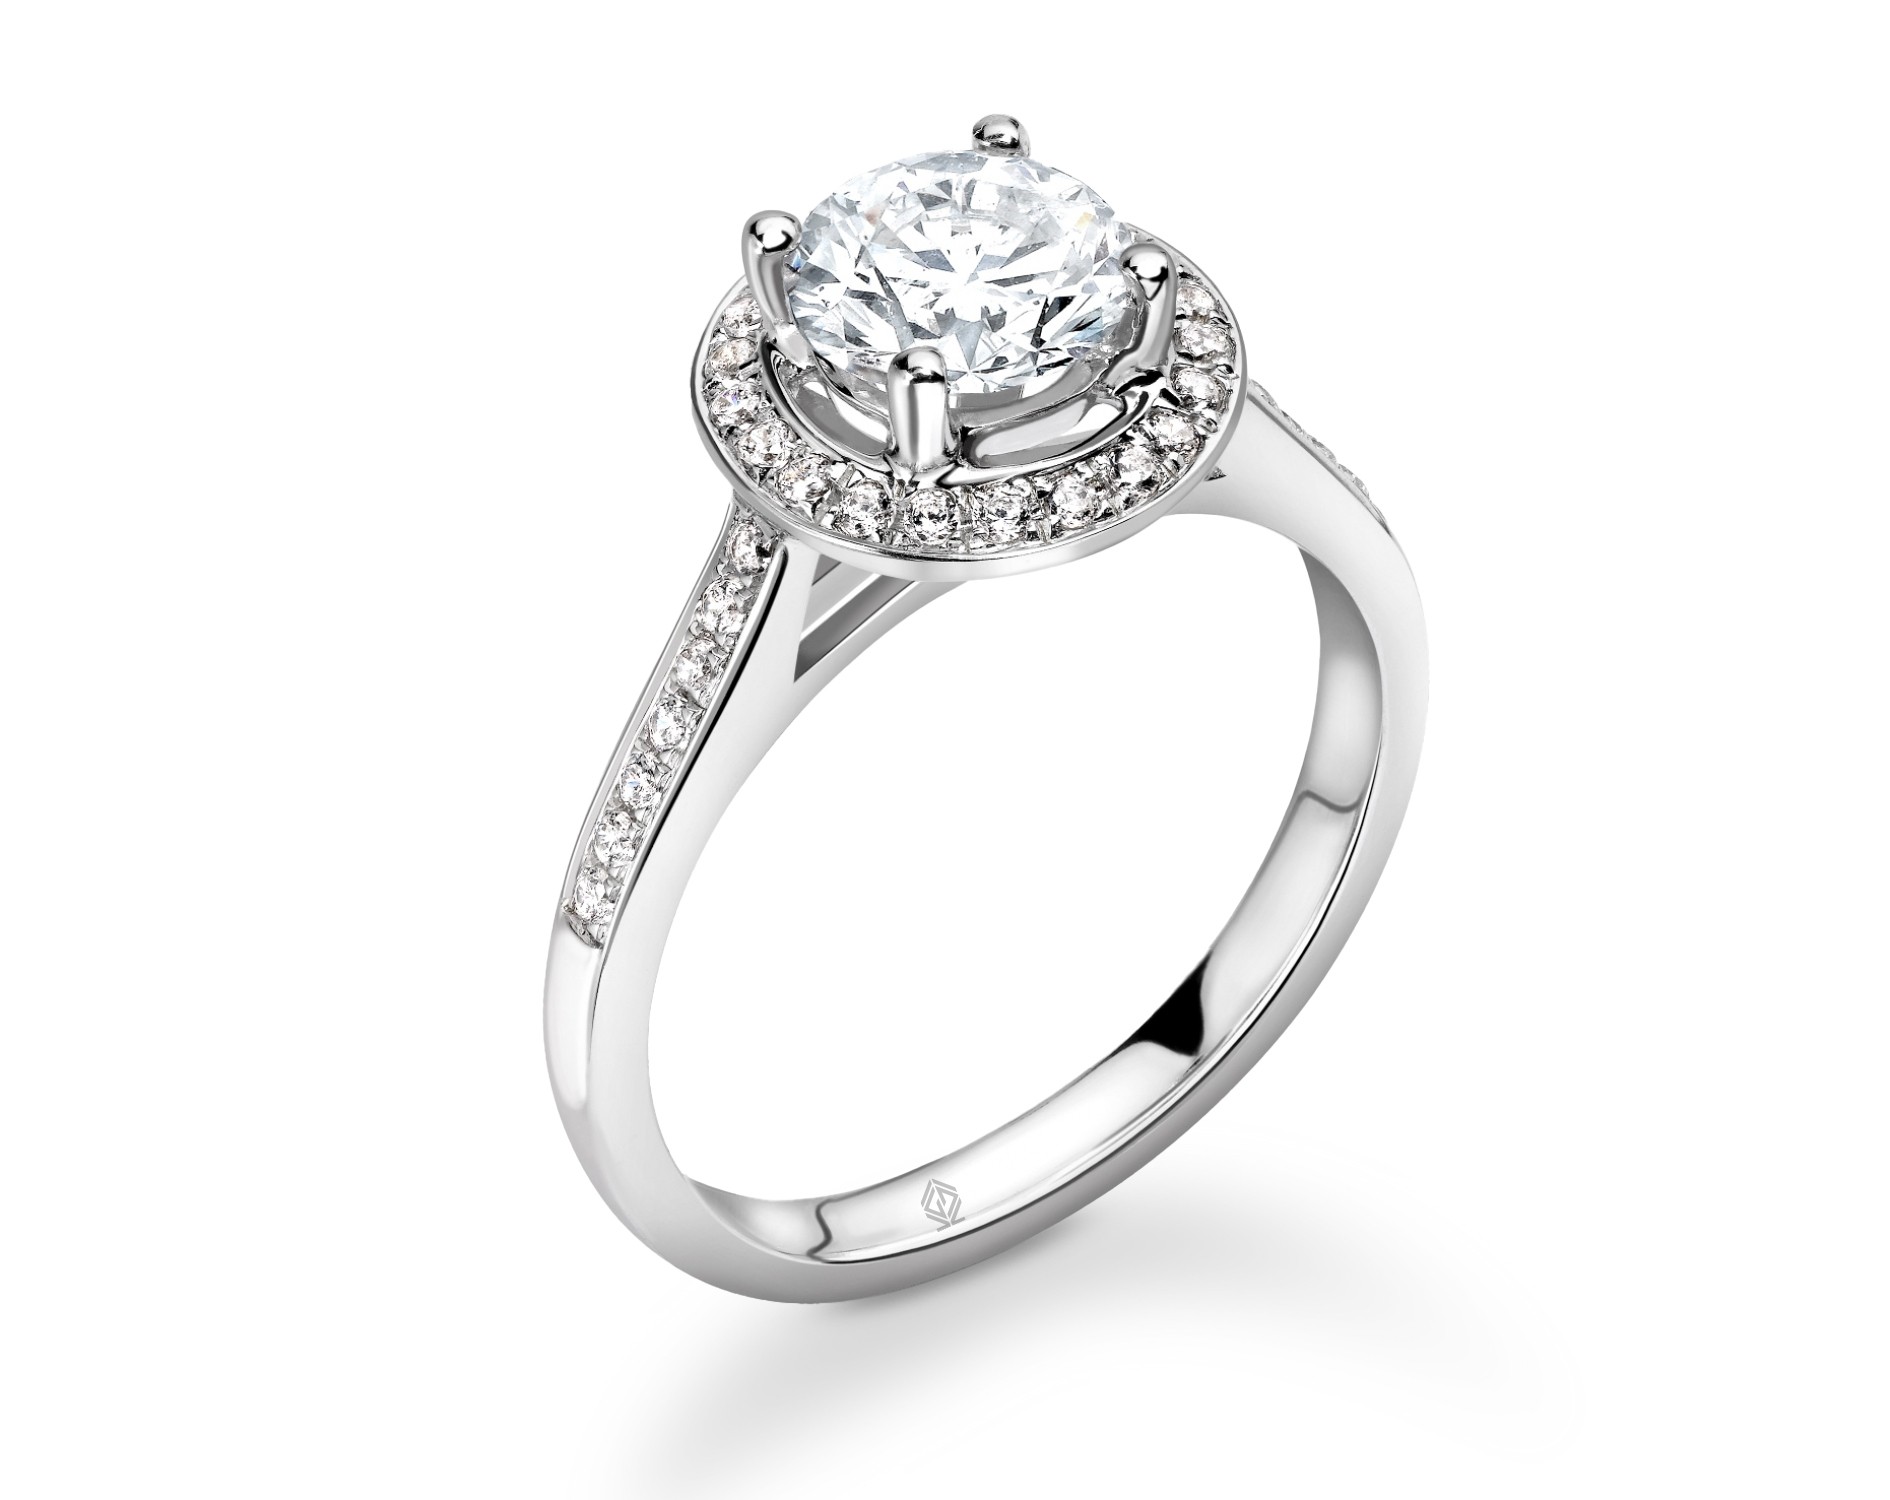 18K WHITE GOLD HALO ROUND CUT DIAMOND ENGAGEMENT RING WITH SIDE STONES CHANNEL SET